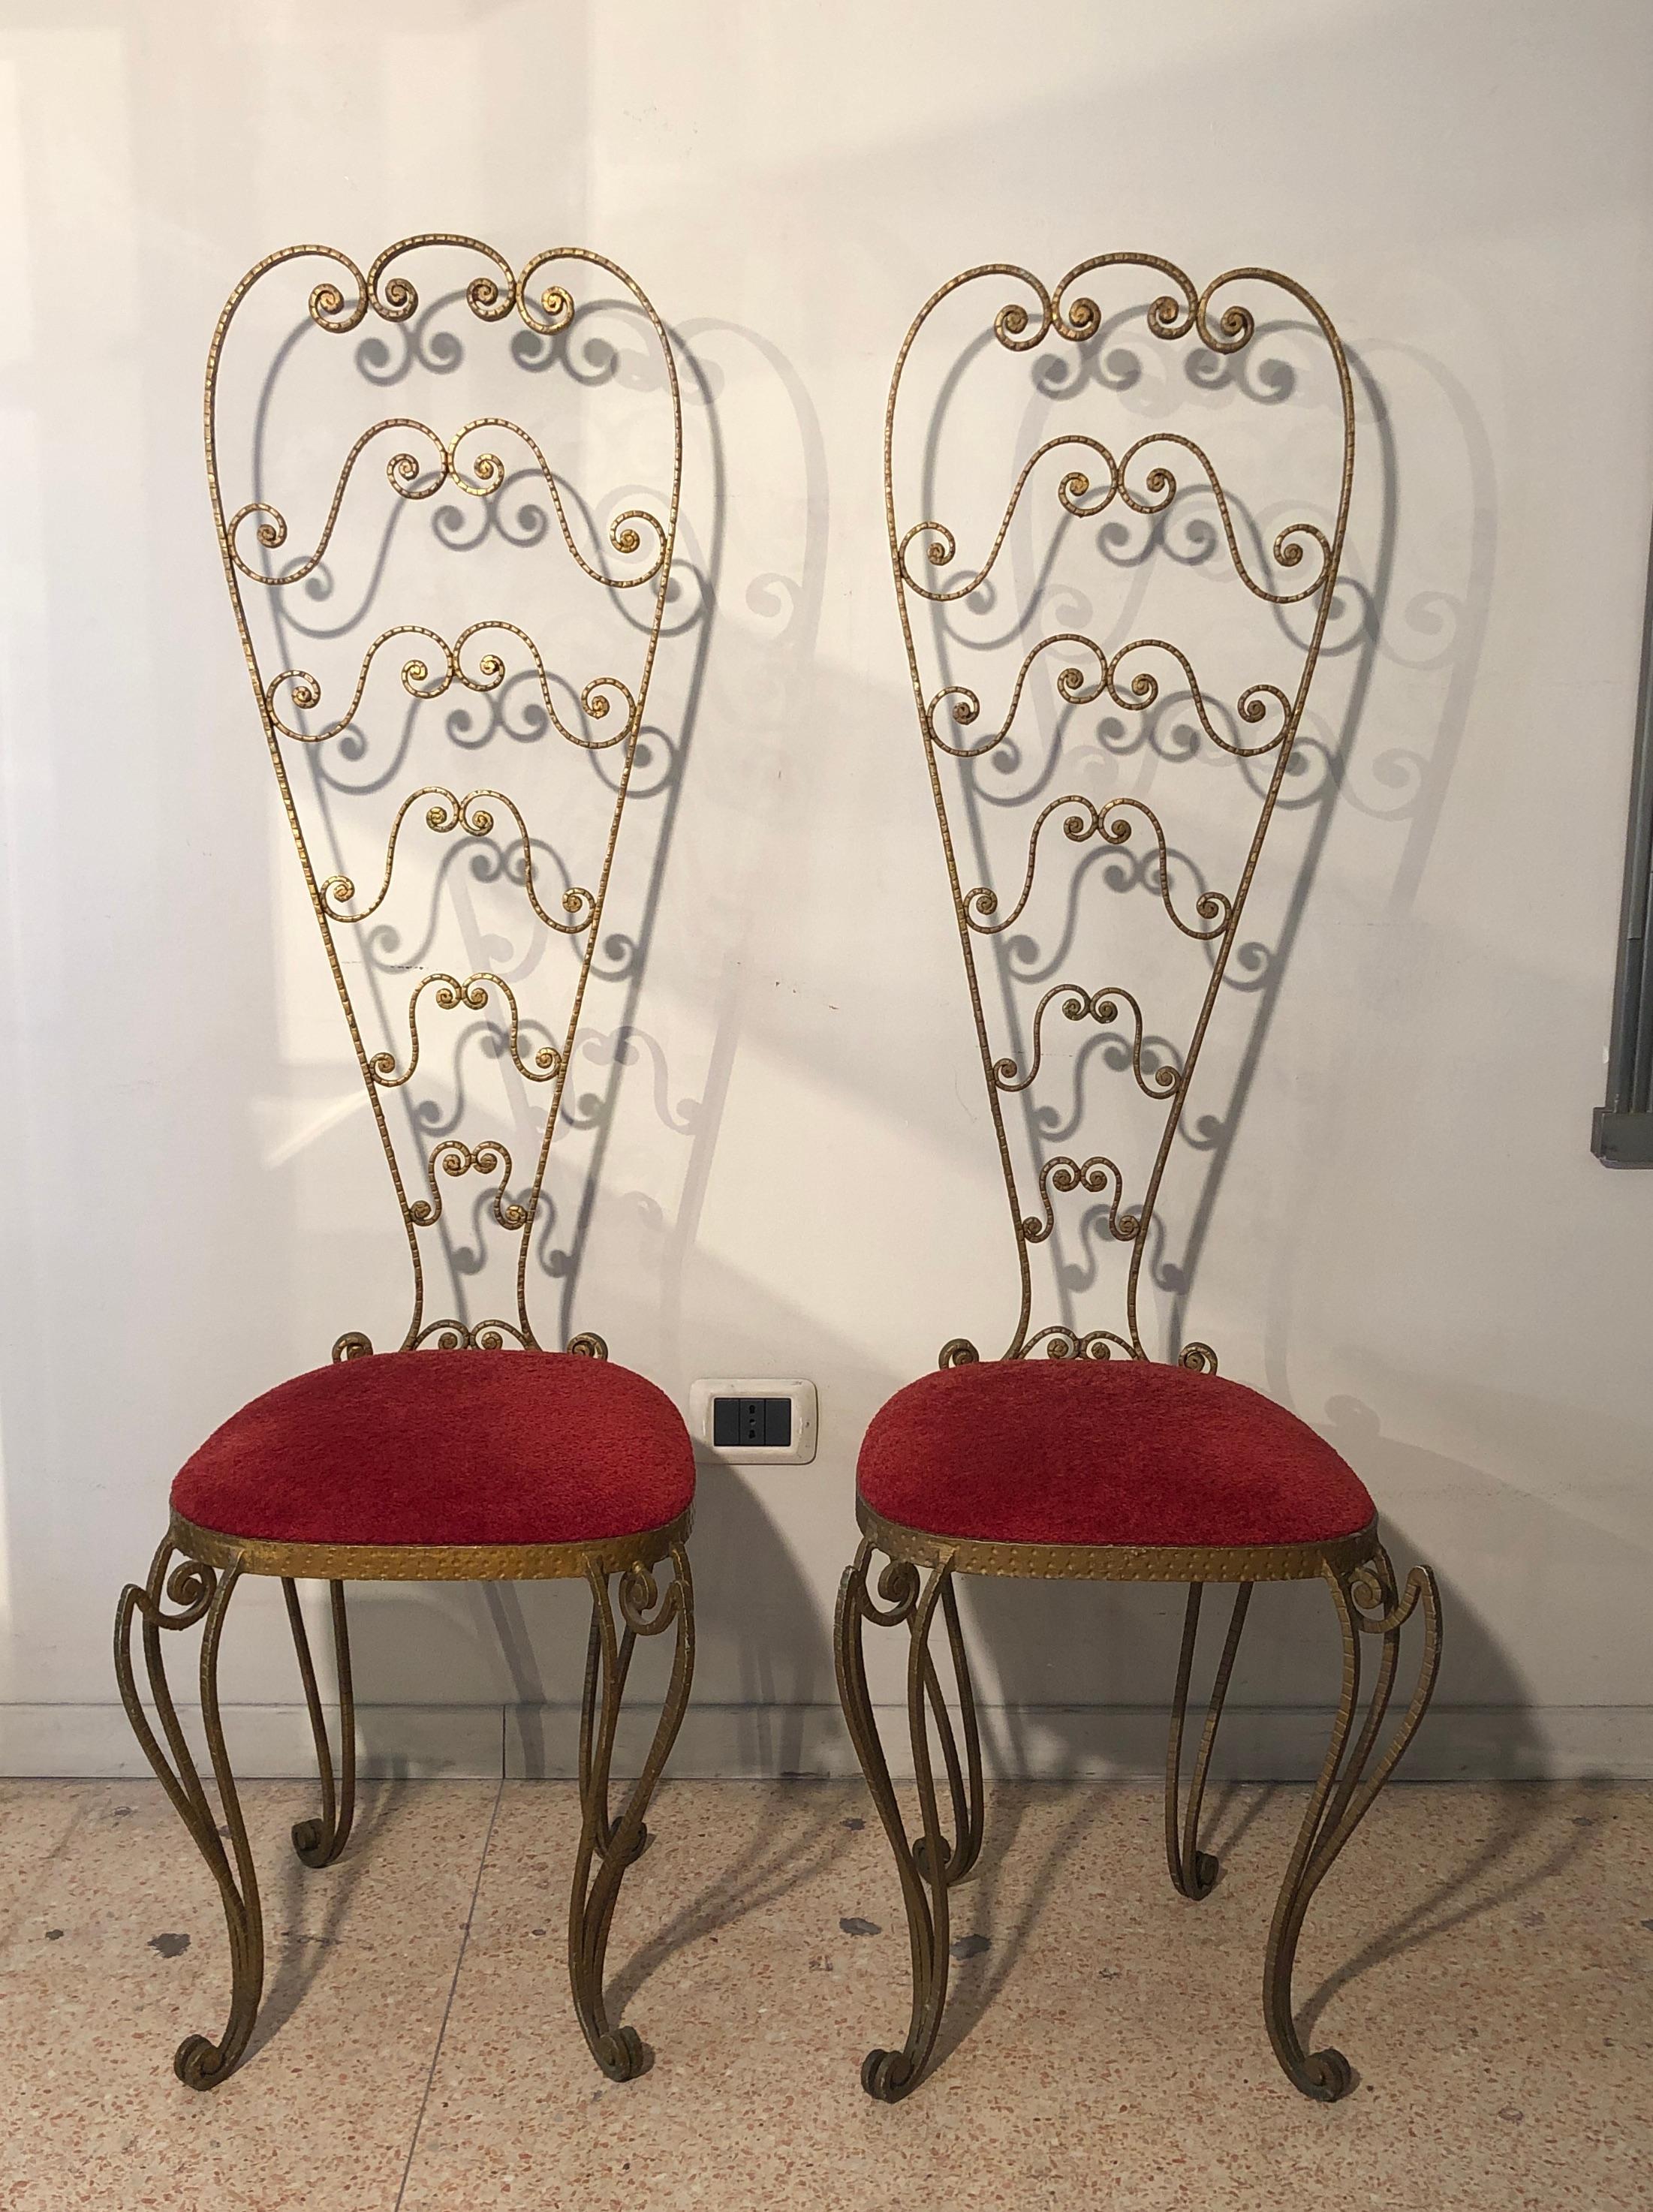 Pier Luigi Colli golden wrought iron chairs from Italy from 1950s. They have been up holstered with vintage red velvet. We have two chairs and each measures H 131 cm, D 24 cm, W 41 cm, seat H 42.5 cm. We have a mirror to be matched with chairs from